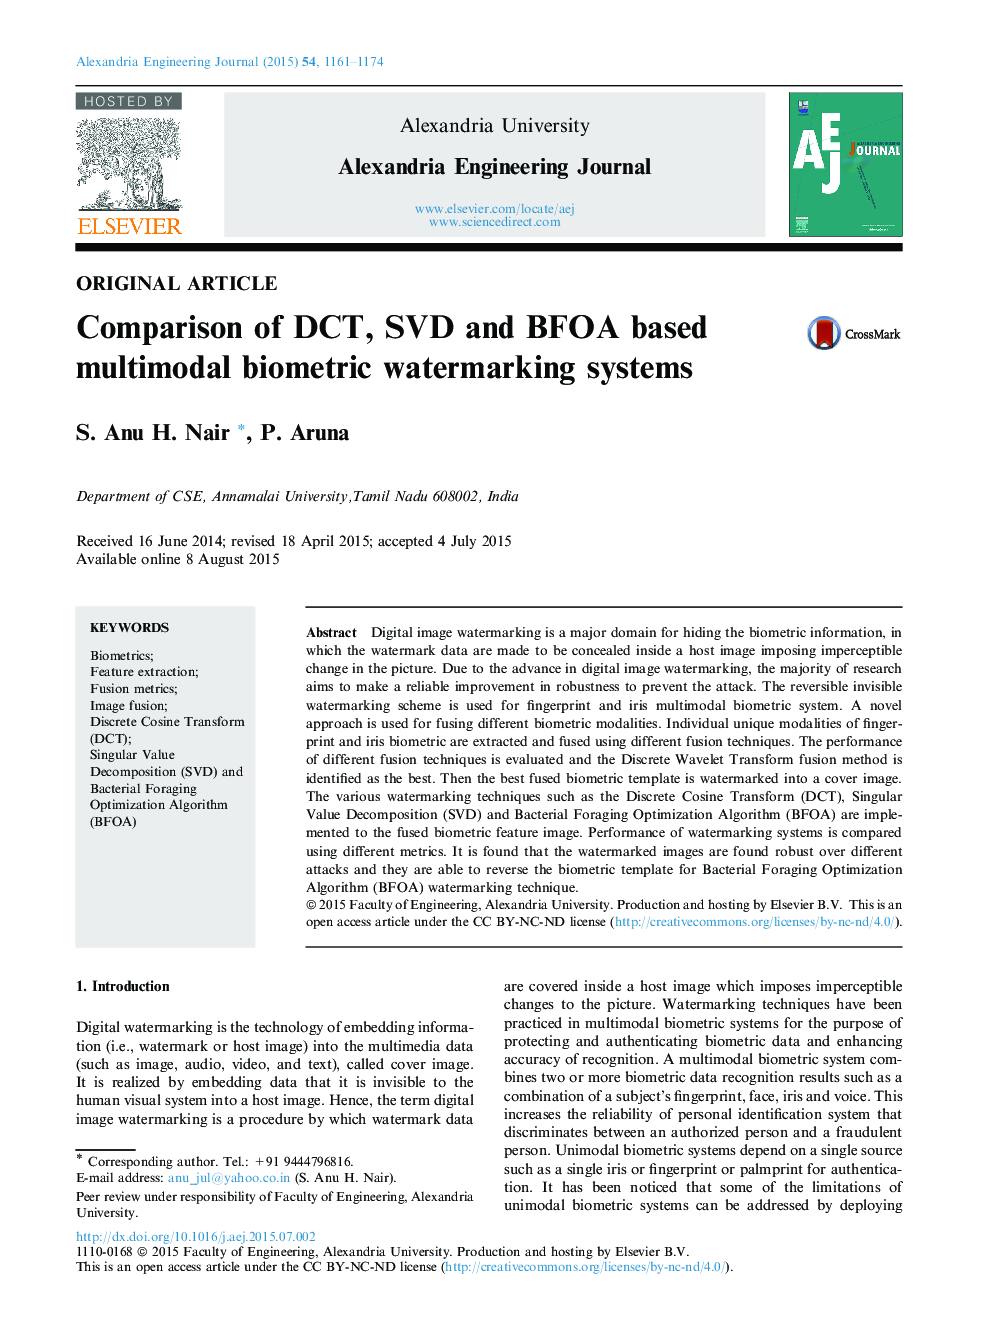 Comparison of DCT, SVD and BFOA based multimodal biometric watermarking systems 